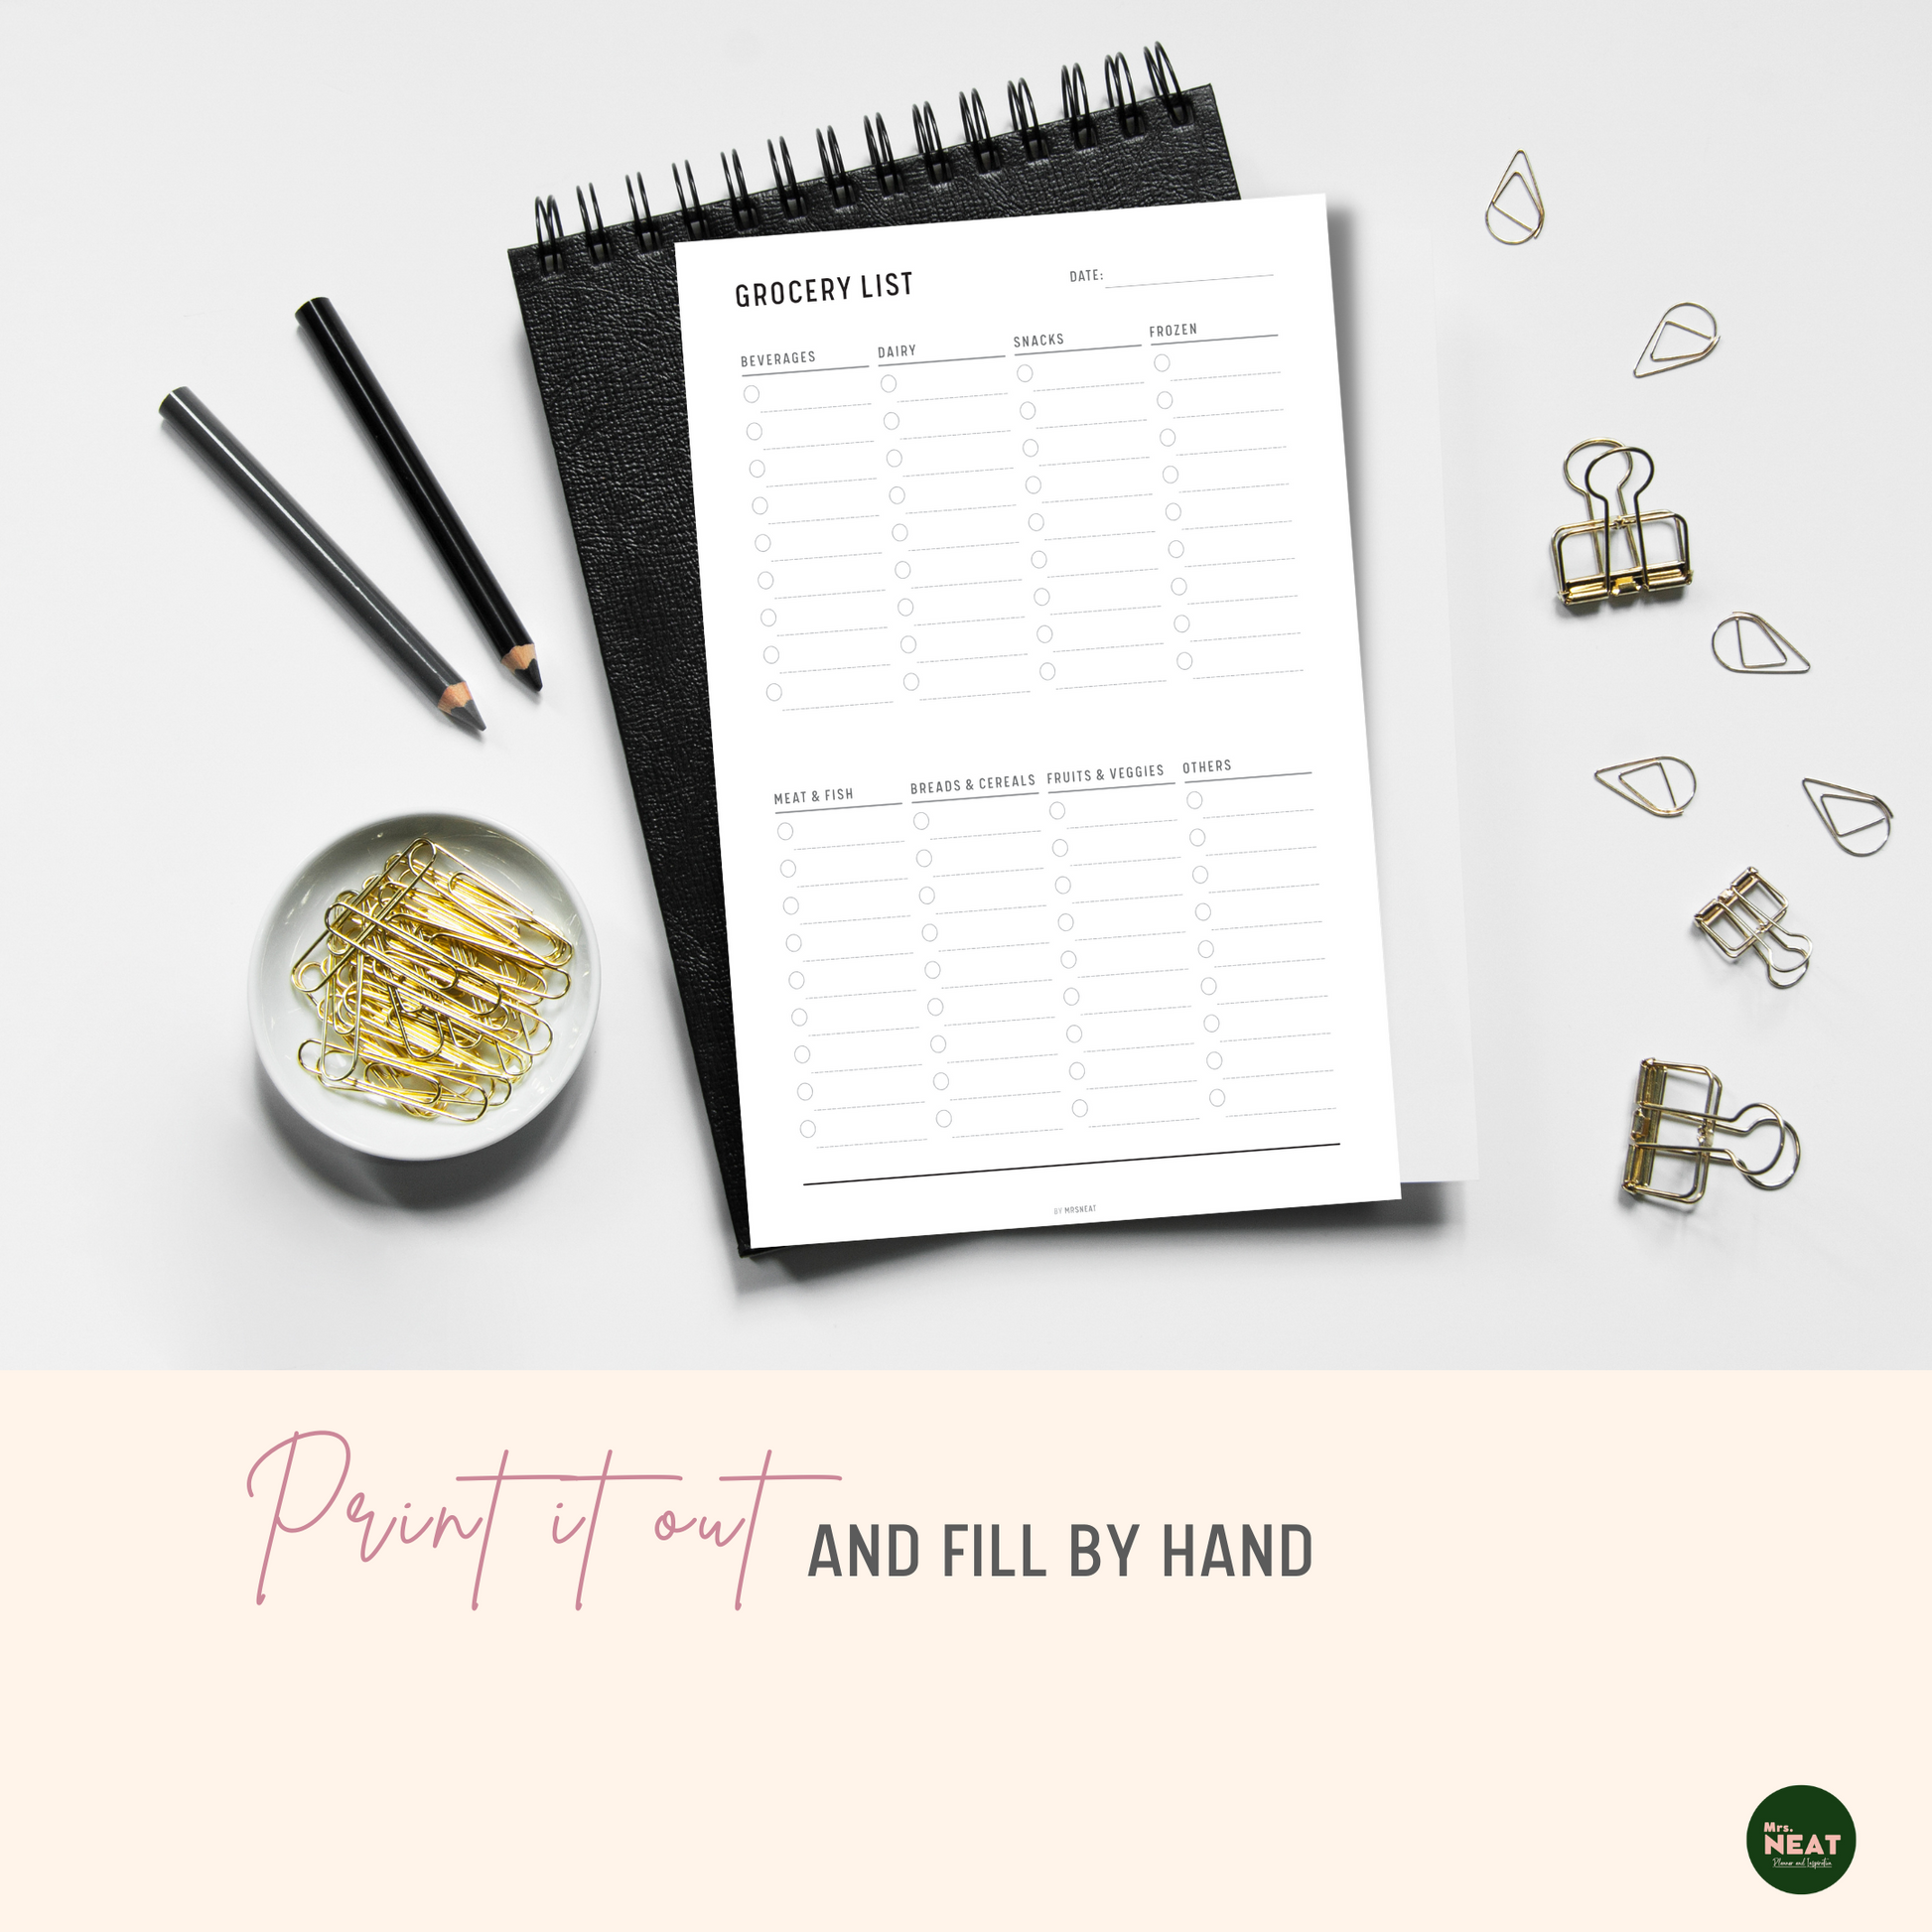 Minimalist Grocery List Planner Printable printed out on paper and put on the black book